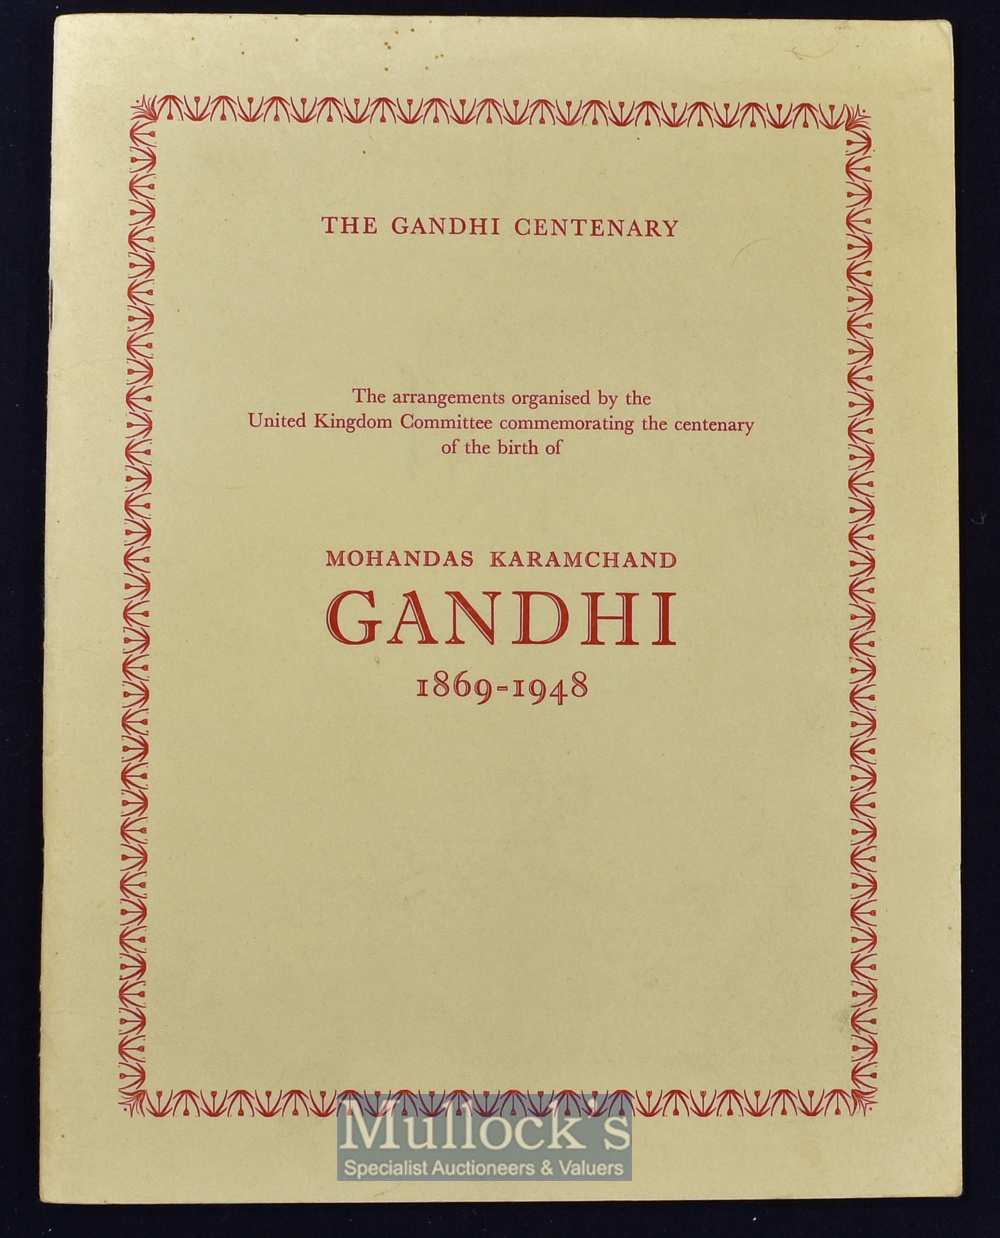 India - 1969 The Gandhi Centenary booklet published for the UK committee for the Gandhi Centenary